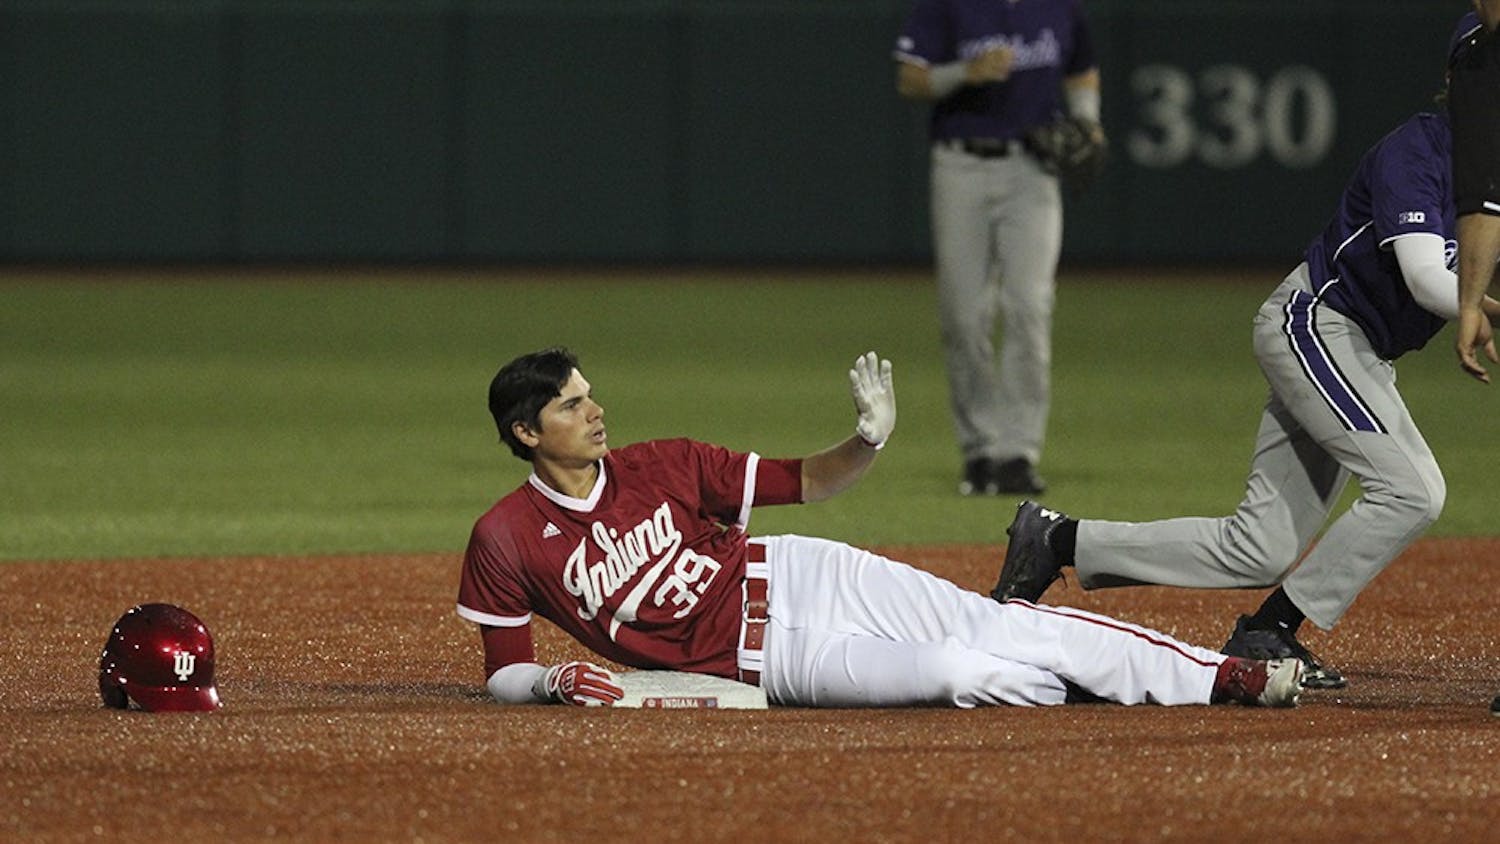 Junior outfielder Craig Dedelow slides into second in the eighth inning of play against Northwestern on Friday night. Dedelow's hit brought Alex Krupa home and brought the score to 3-2 with Northwestern winning, but the Hoosiers got one more run in the eighth and another in the ninth to win.